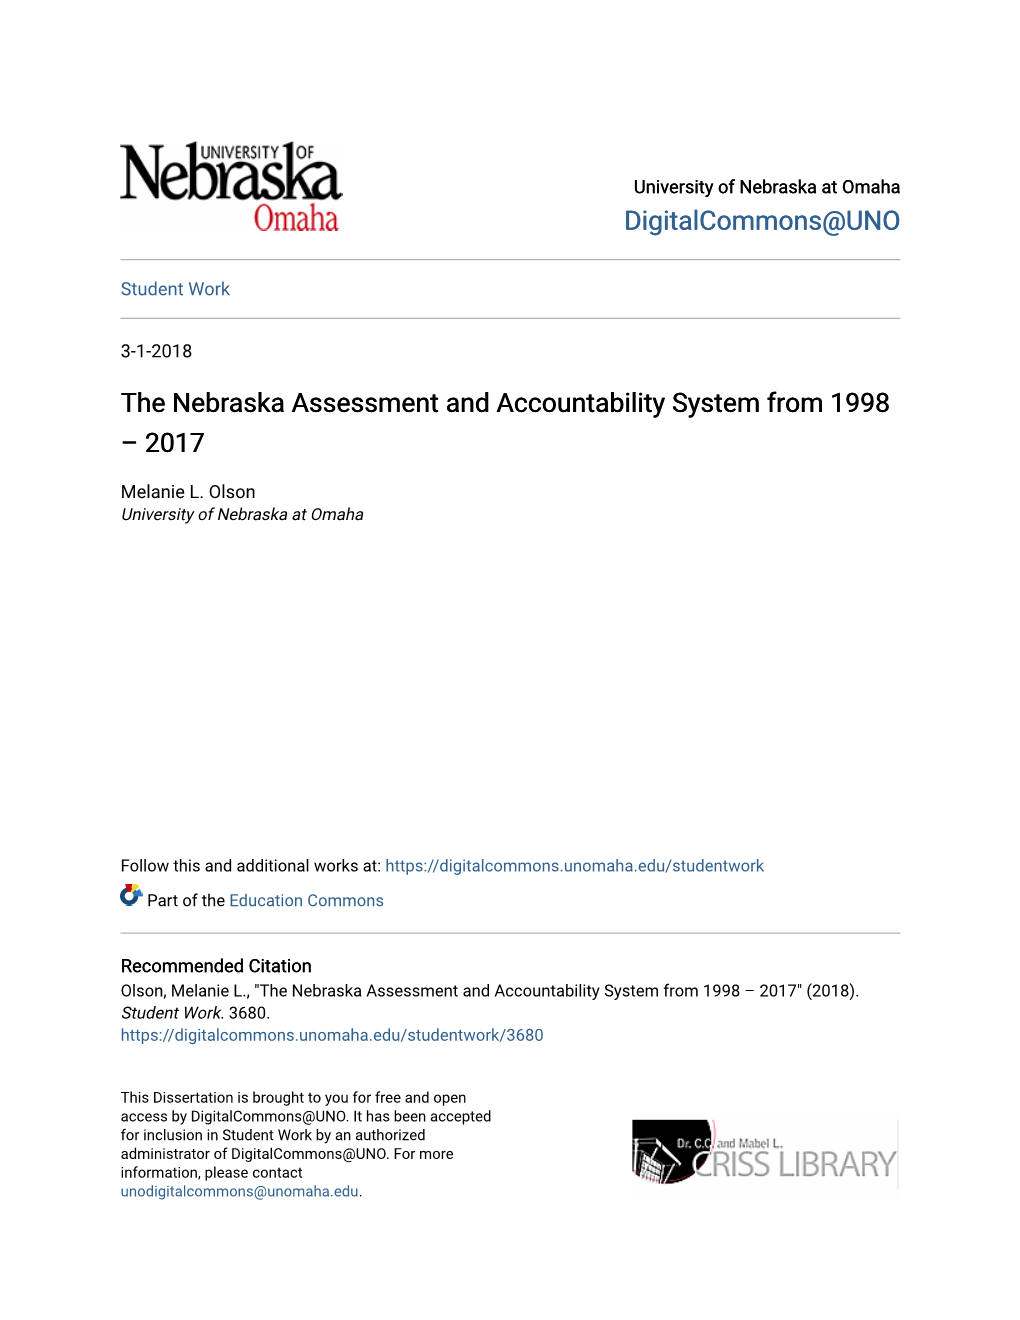 The Nebraska Assessment and Accountability System from 1998 – 2017